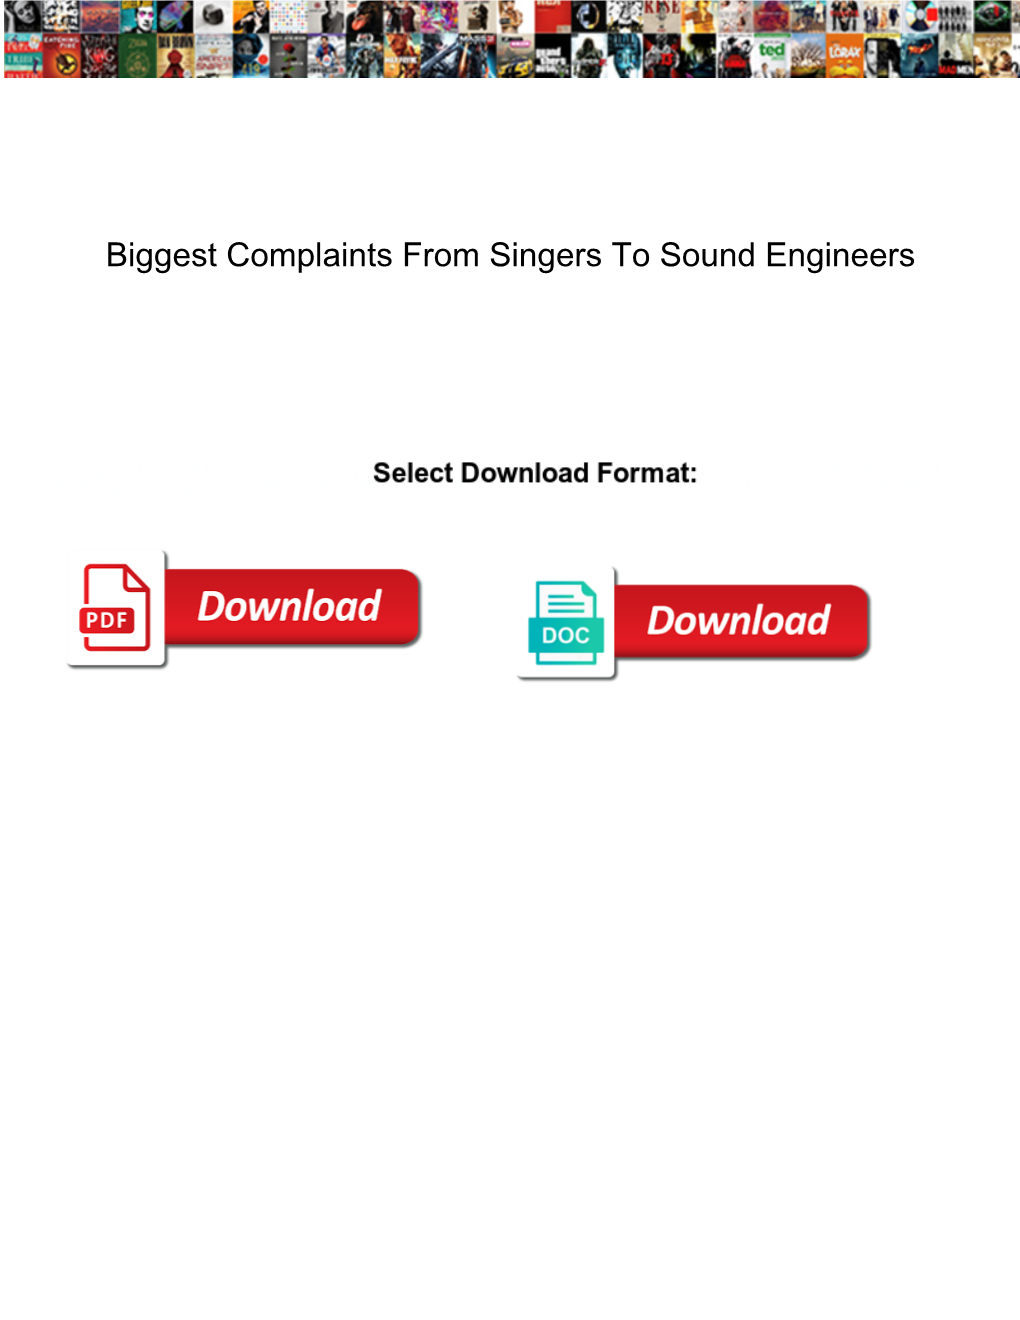 Biggest Complaints from Singers to Sound Engineers